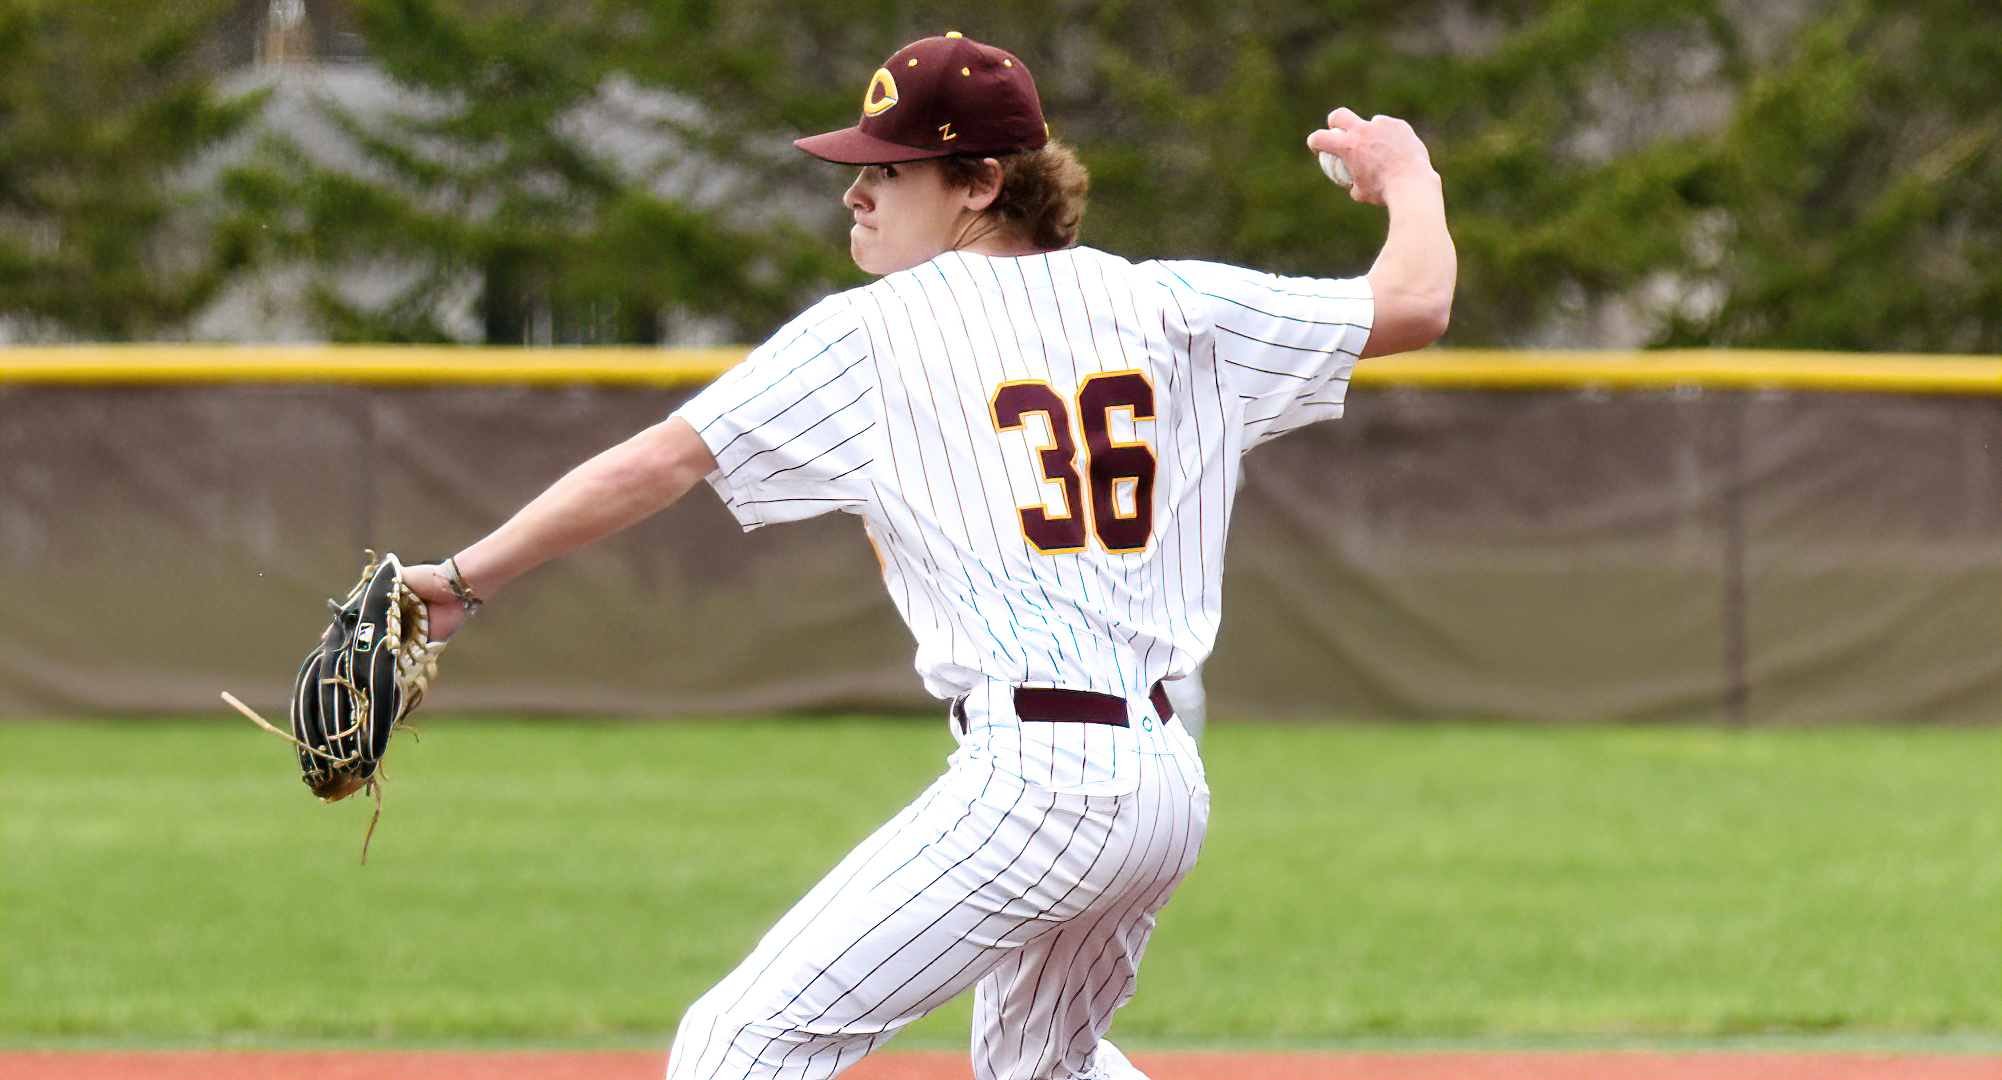 Carter Thielke was one of six pitchers who held Hamline to five runs in the Cobbers' sweep over the Pipers. He started Game 1 and went 6.0 innings.